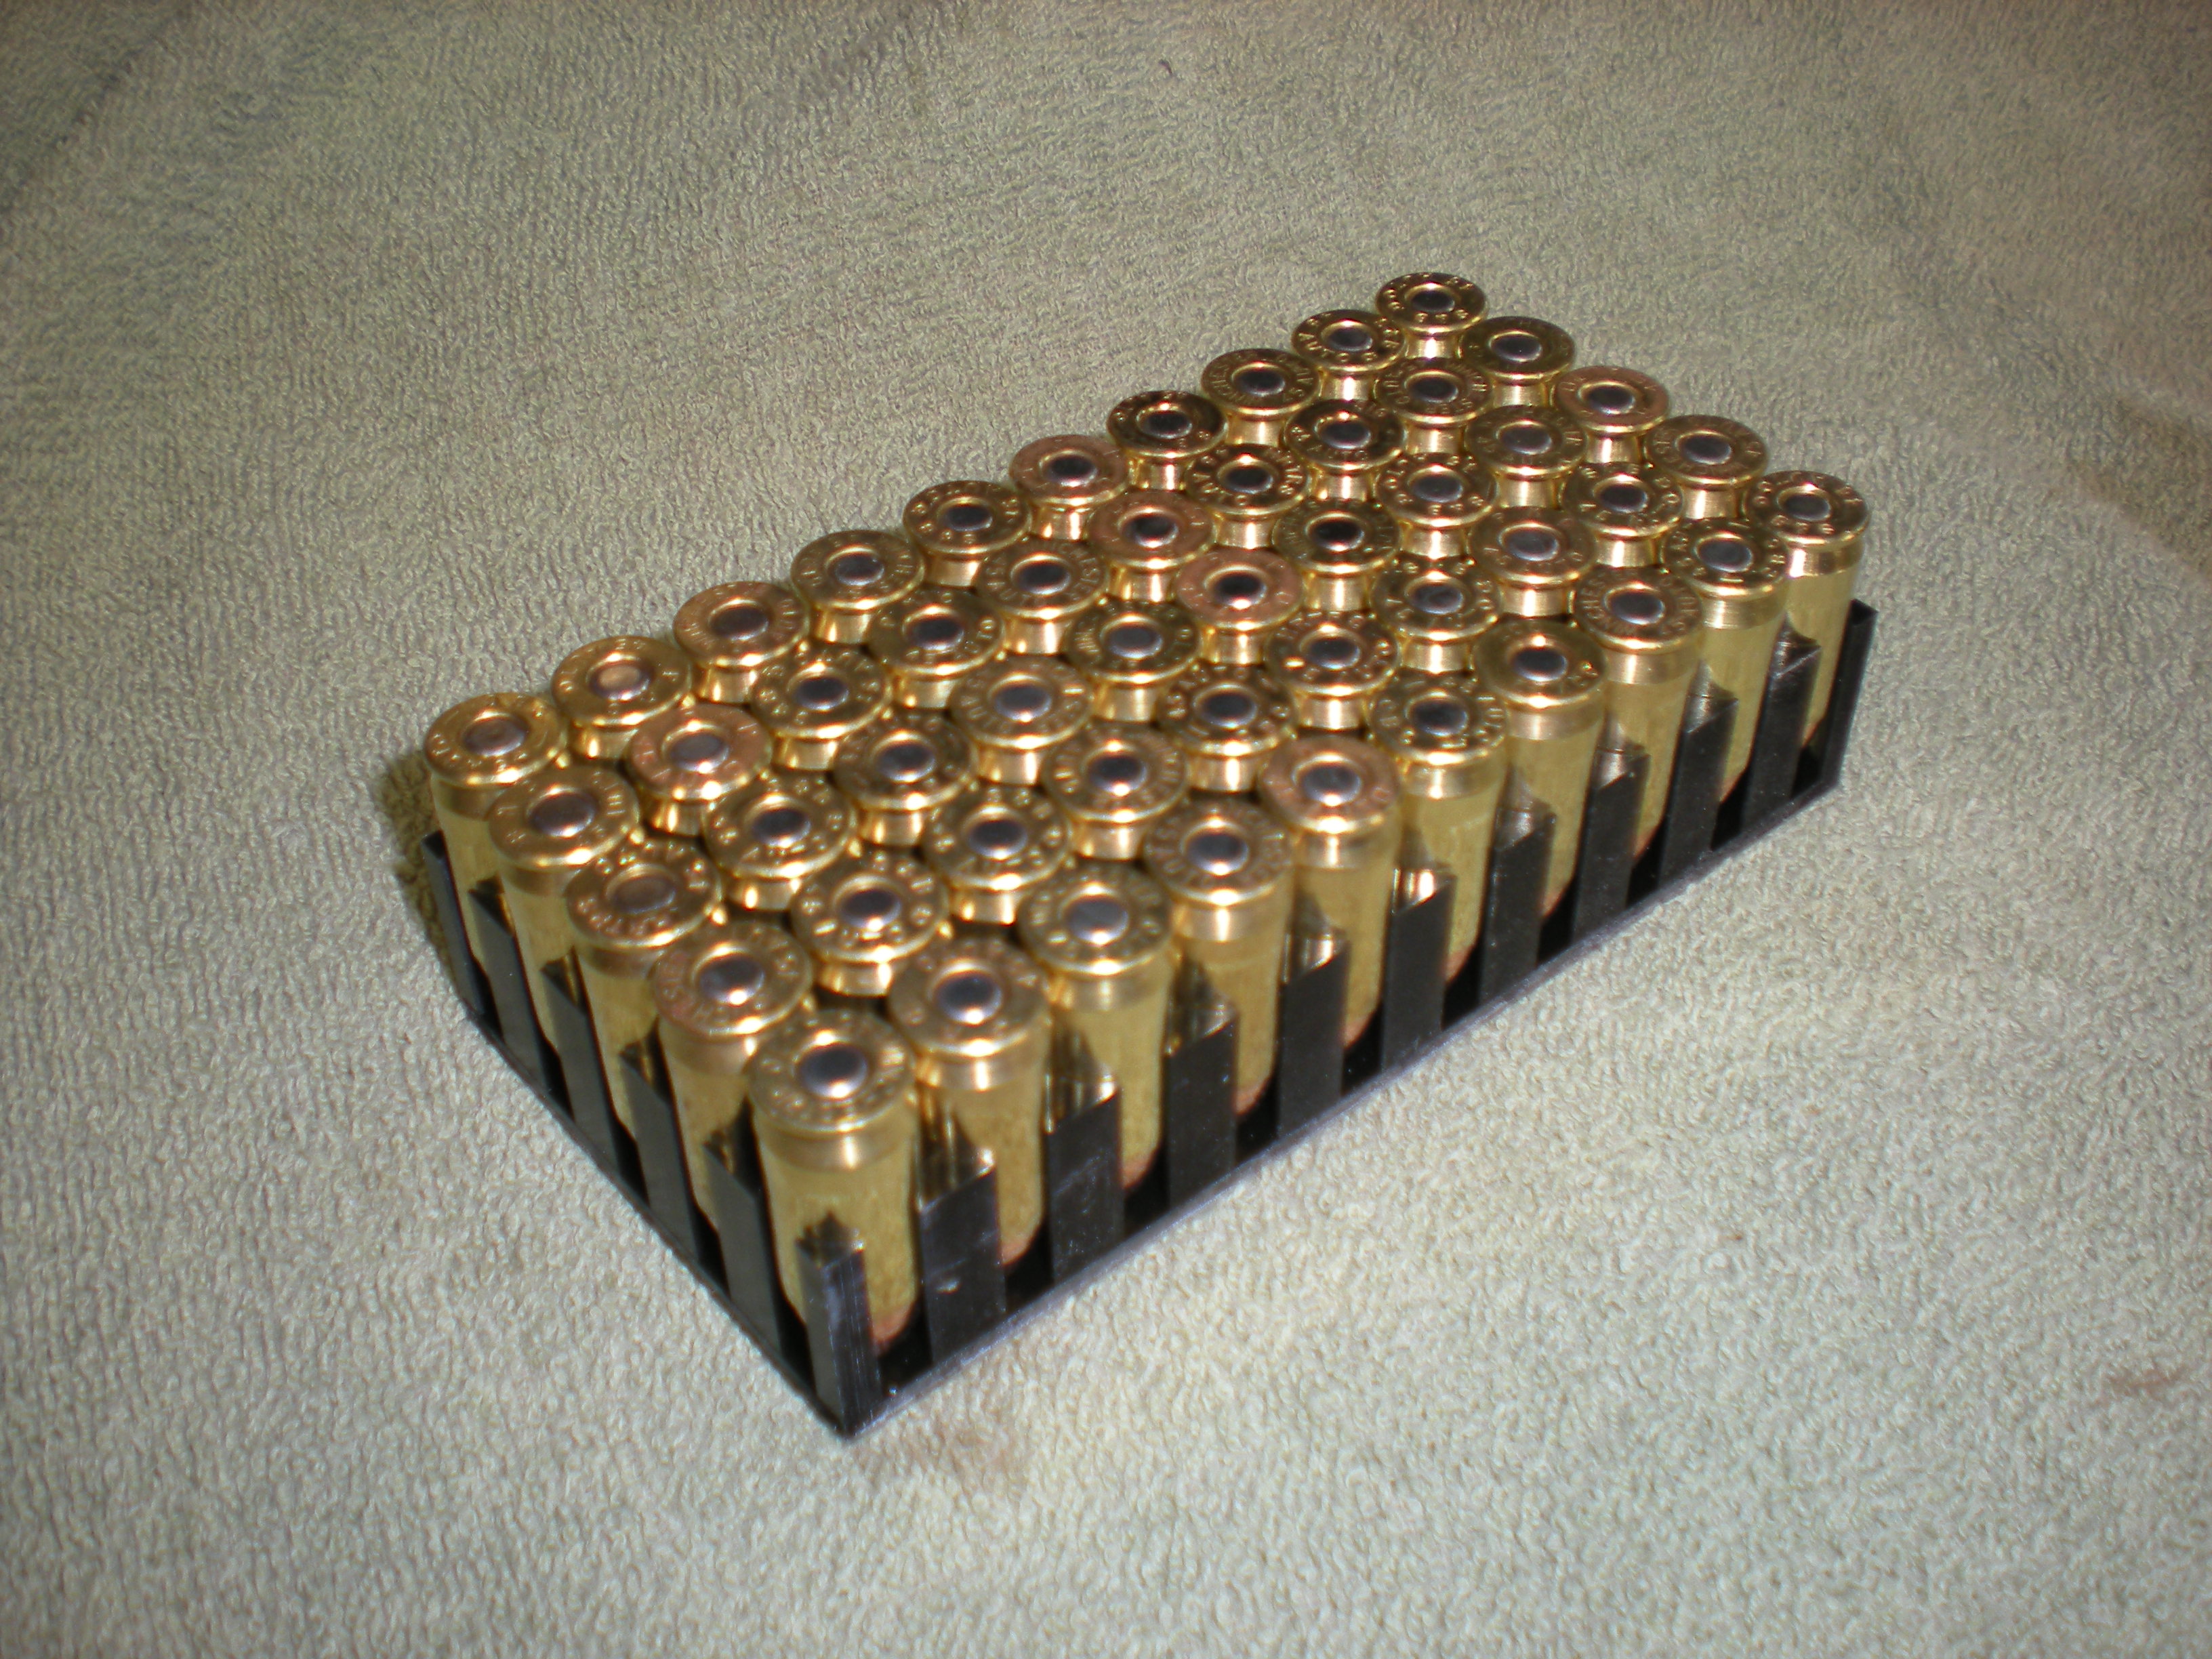 45 acp Trays - Multiple sizes by Jarod Can Make It | Download free STL ...